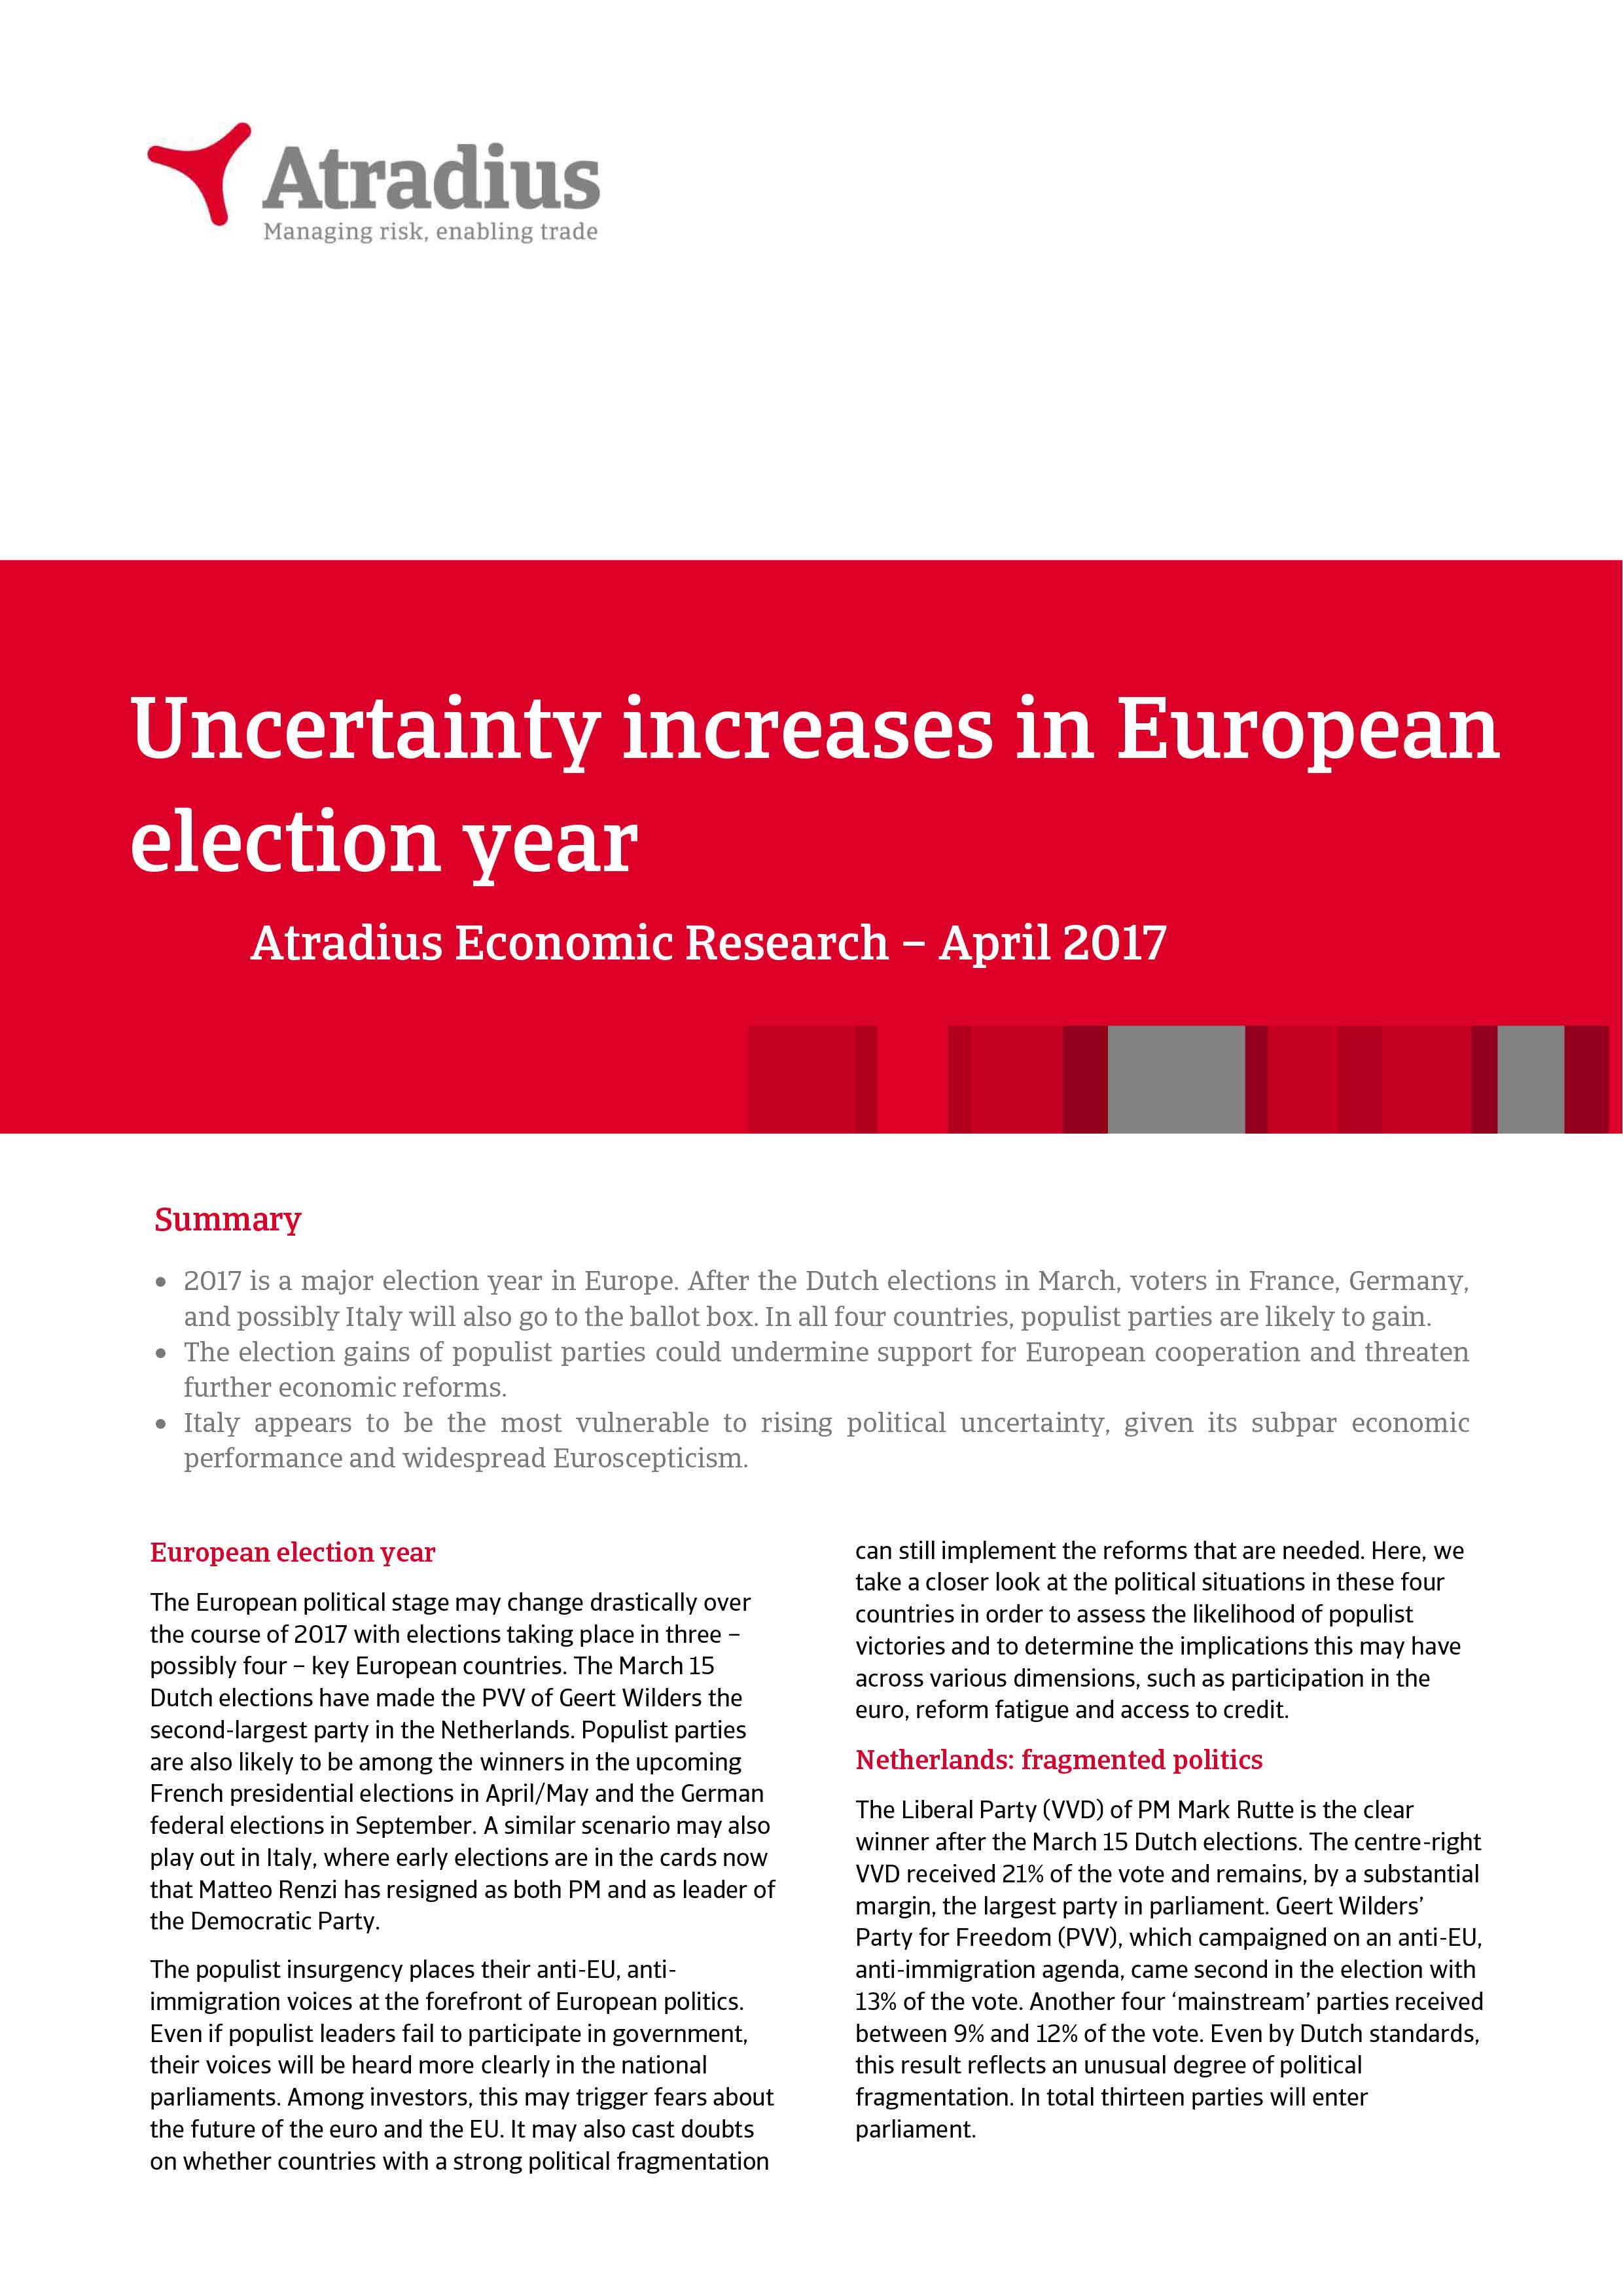 Uncertainty increases in European election year